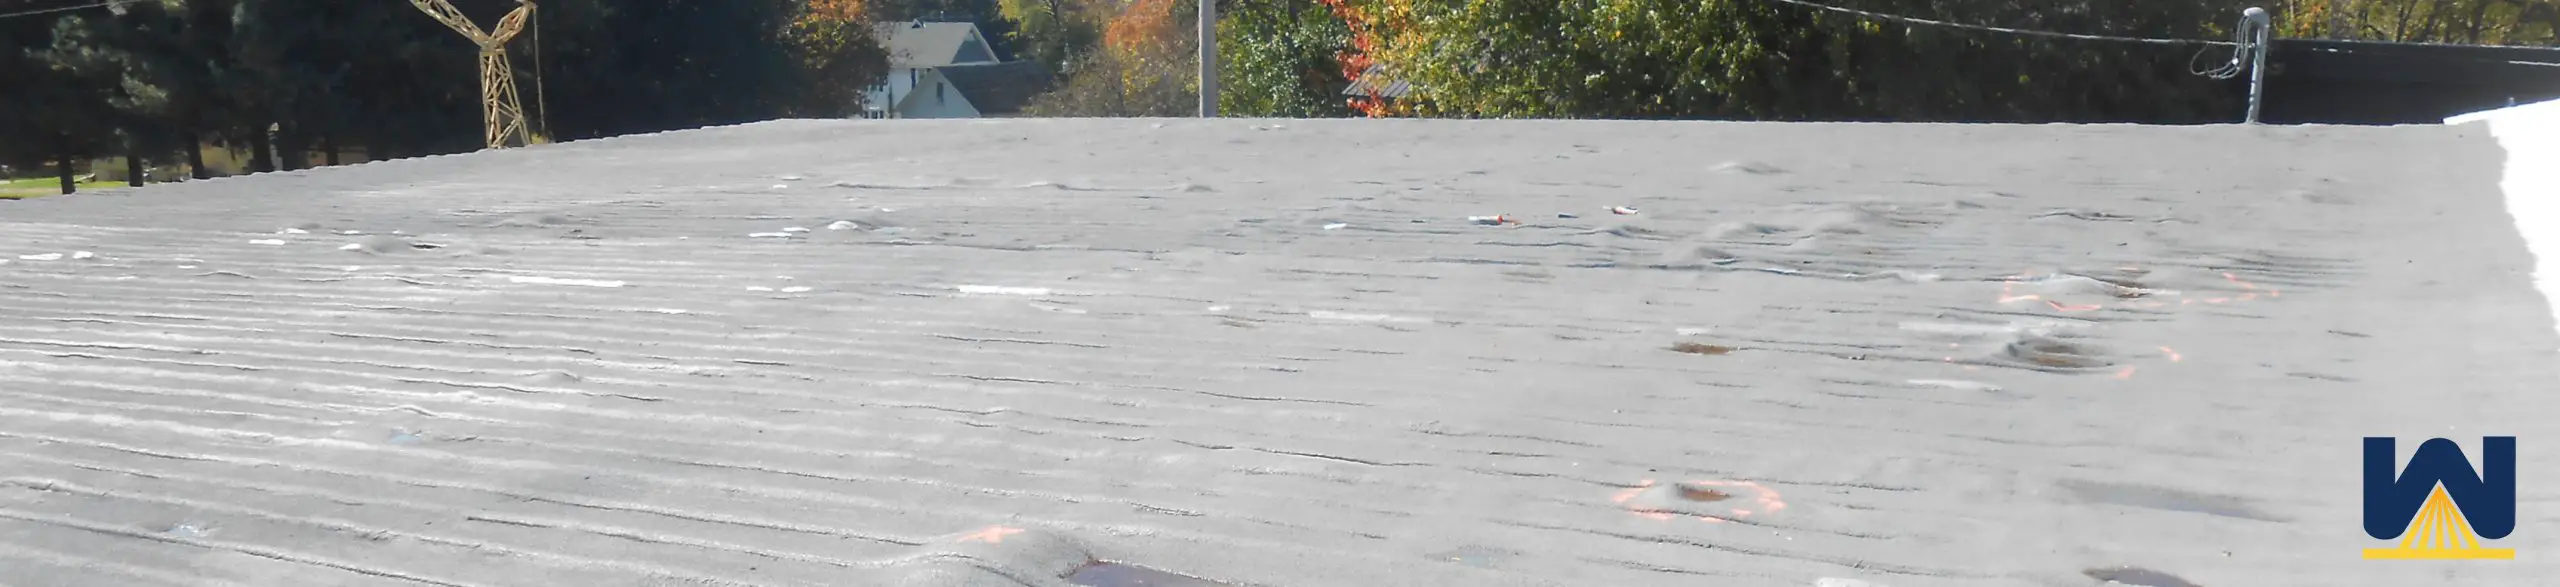 Membrane Roof Blisters: Causes, Prevention, and Repair ...